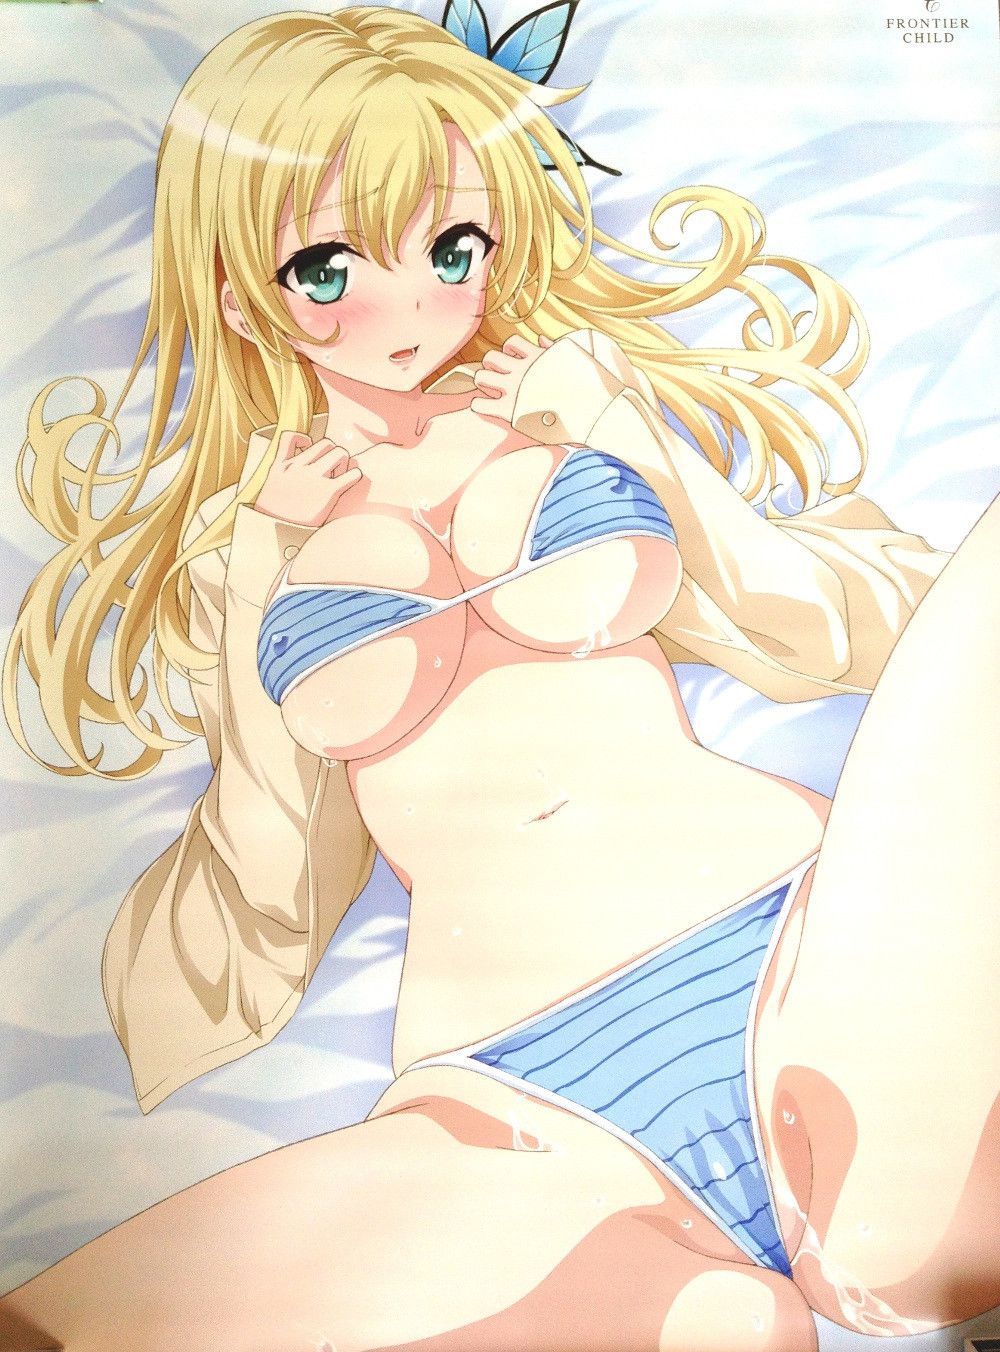 [image] Eroticism character wwwwwwww which was embodied of the sexual desire to be called Hoshina Kashiwazaki of "there are few friends in me" 1